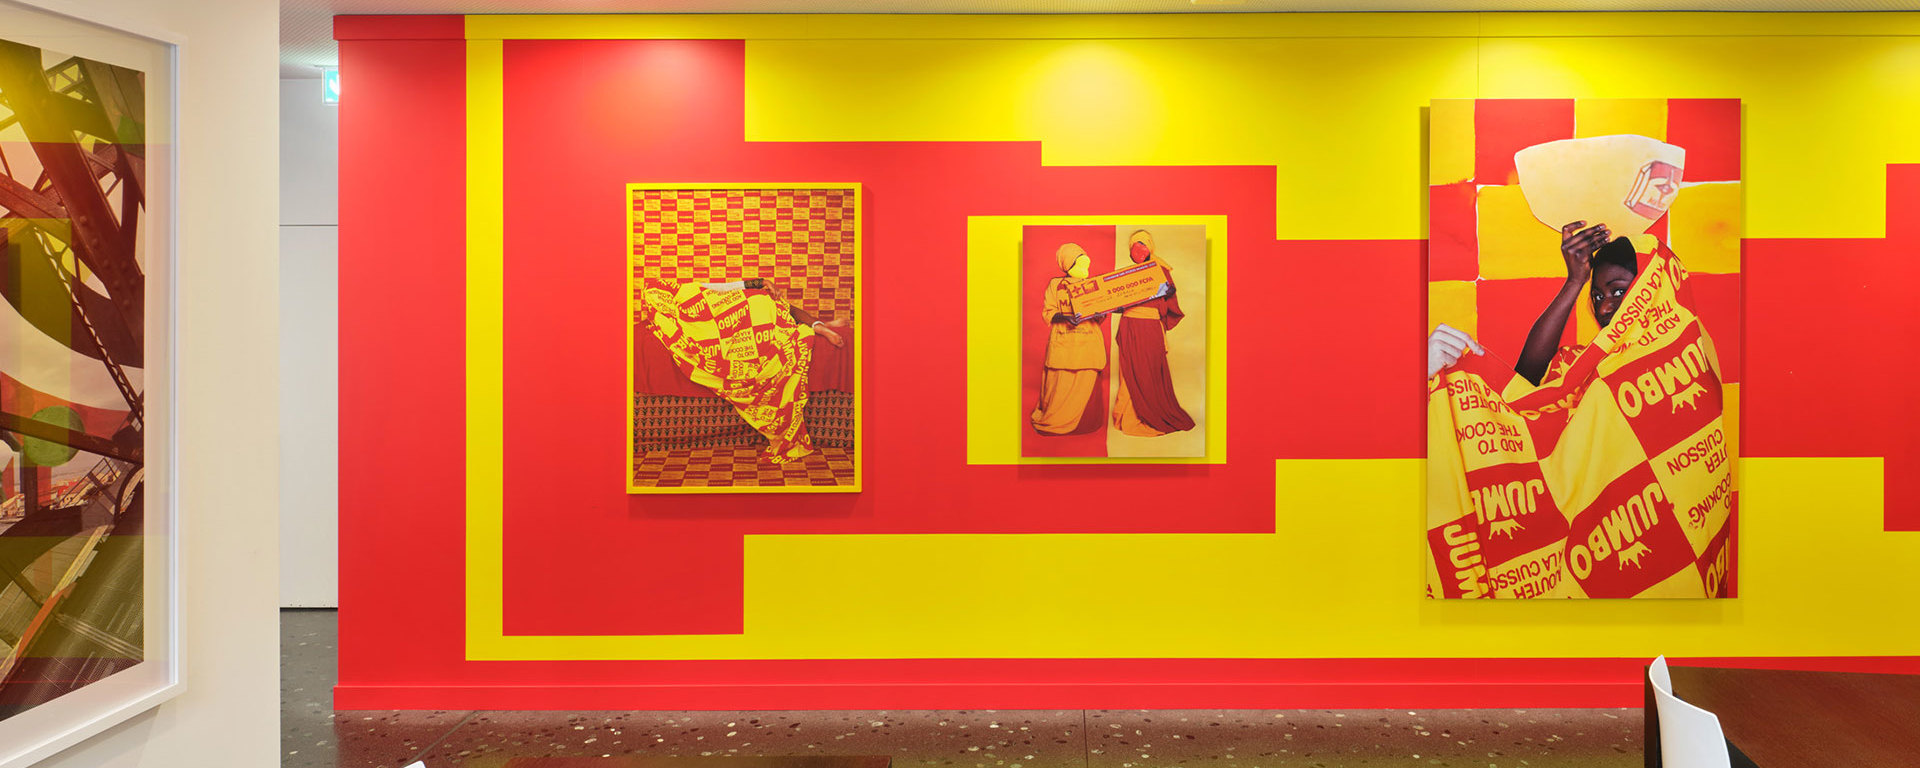 Art Vontobel - Photo wall in red and yellow with a photo series in the staff restaurant